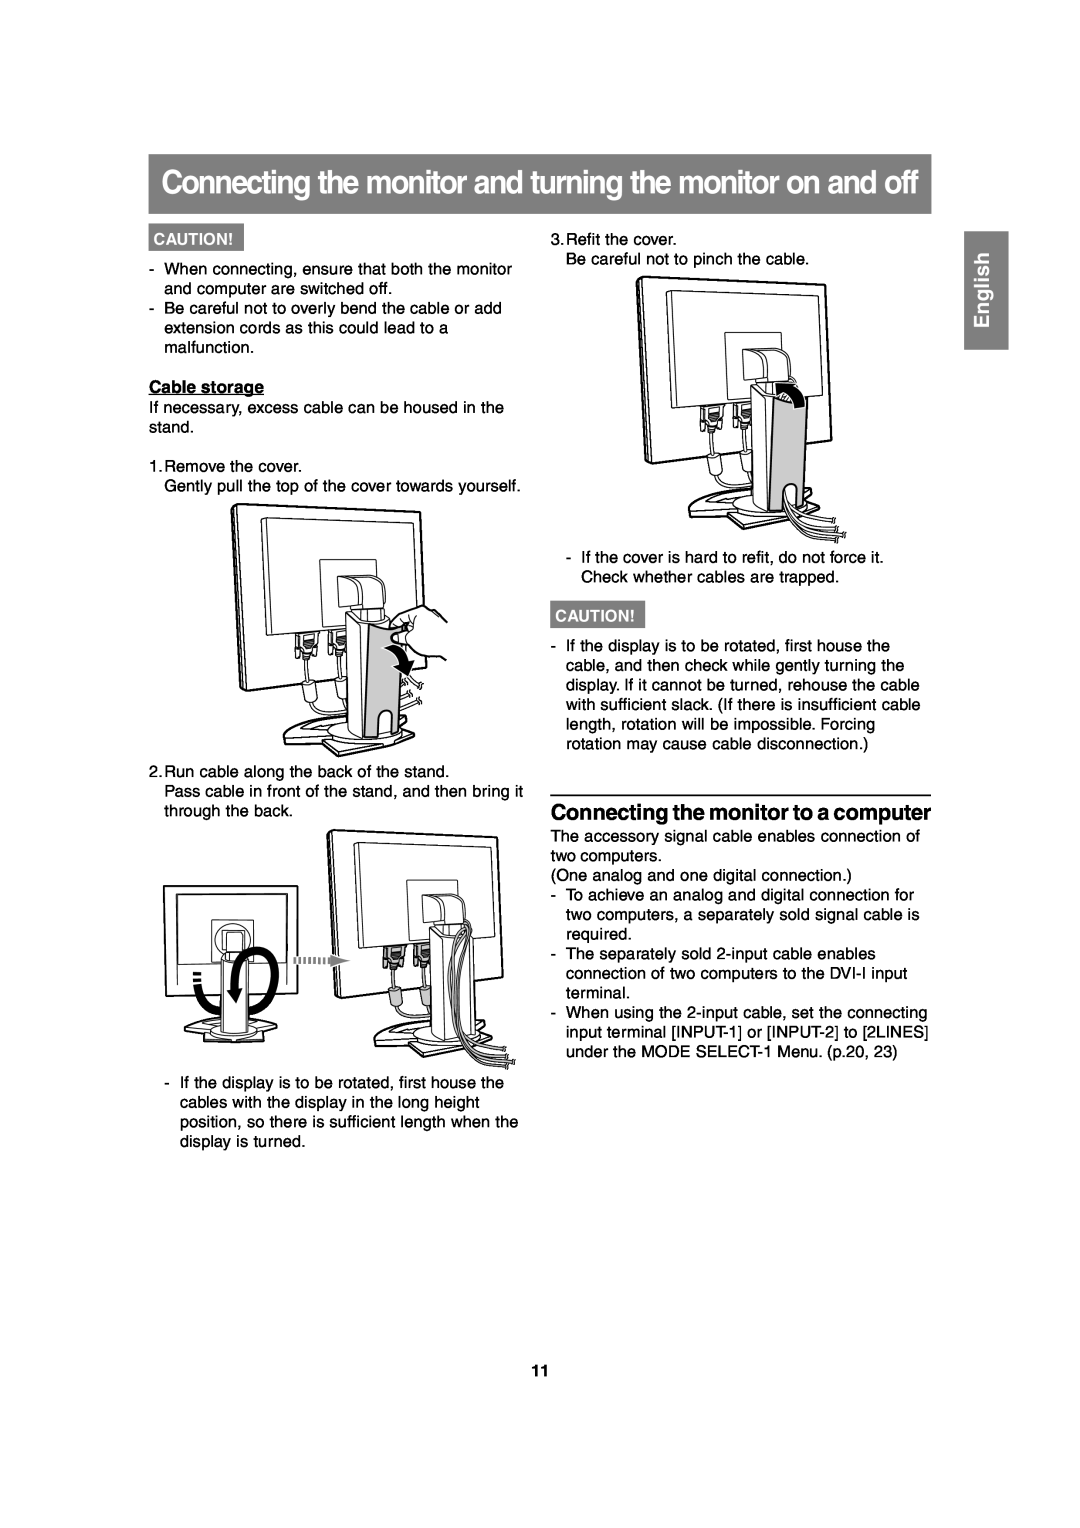 Sharp LL-T2020 operation manual Connecting the monitor to a computer, Cable storage, English 